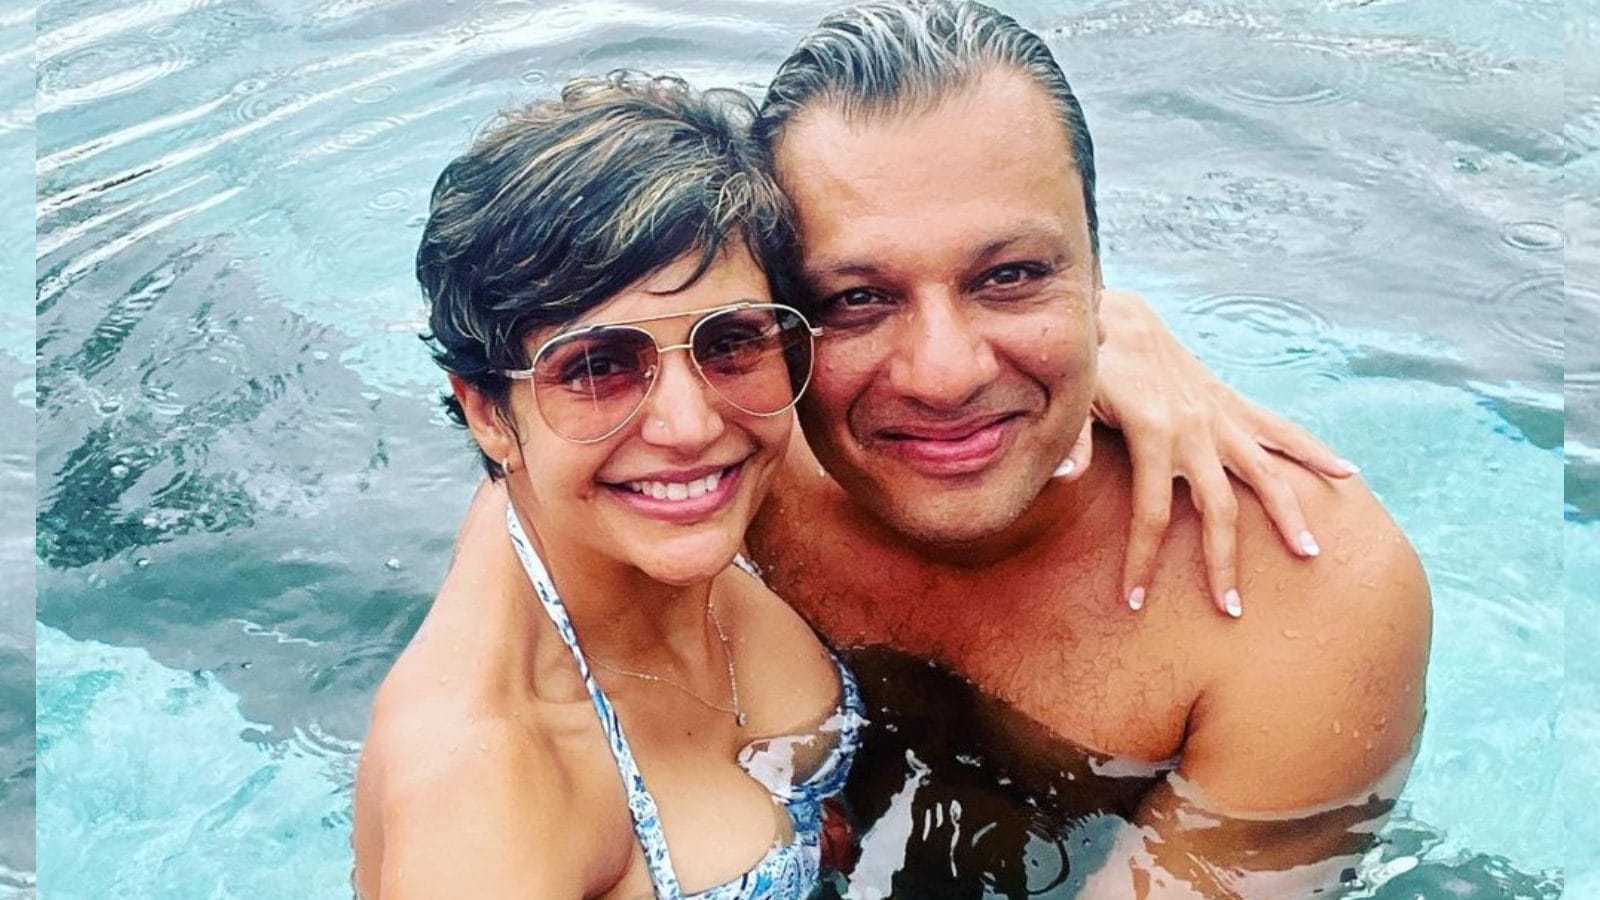 Mandira Bedi Turns Instagram Comments Off After Facing Trolling Over Bikini Pics With Male Friend